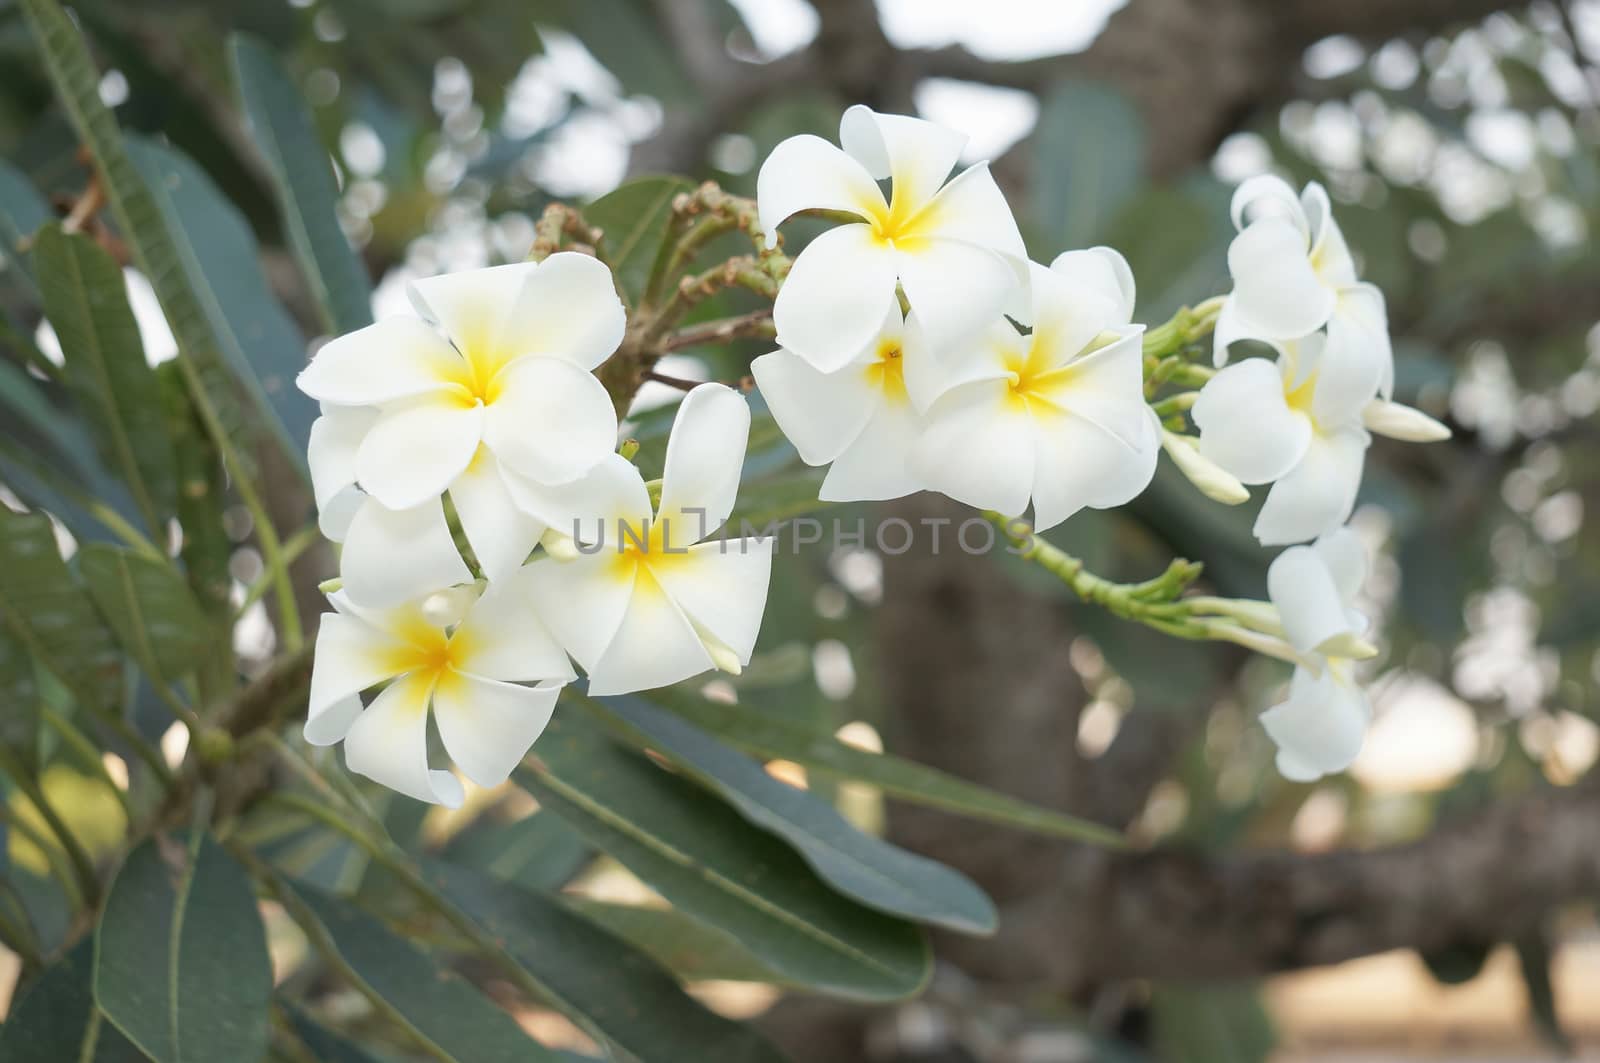 Group of white and yellow plumeria have with green leaves at riverside.